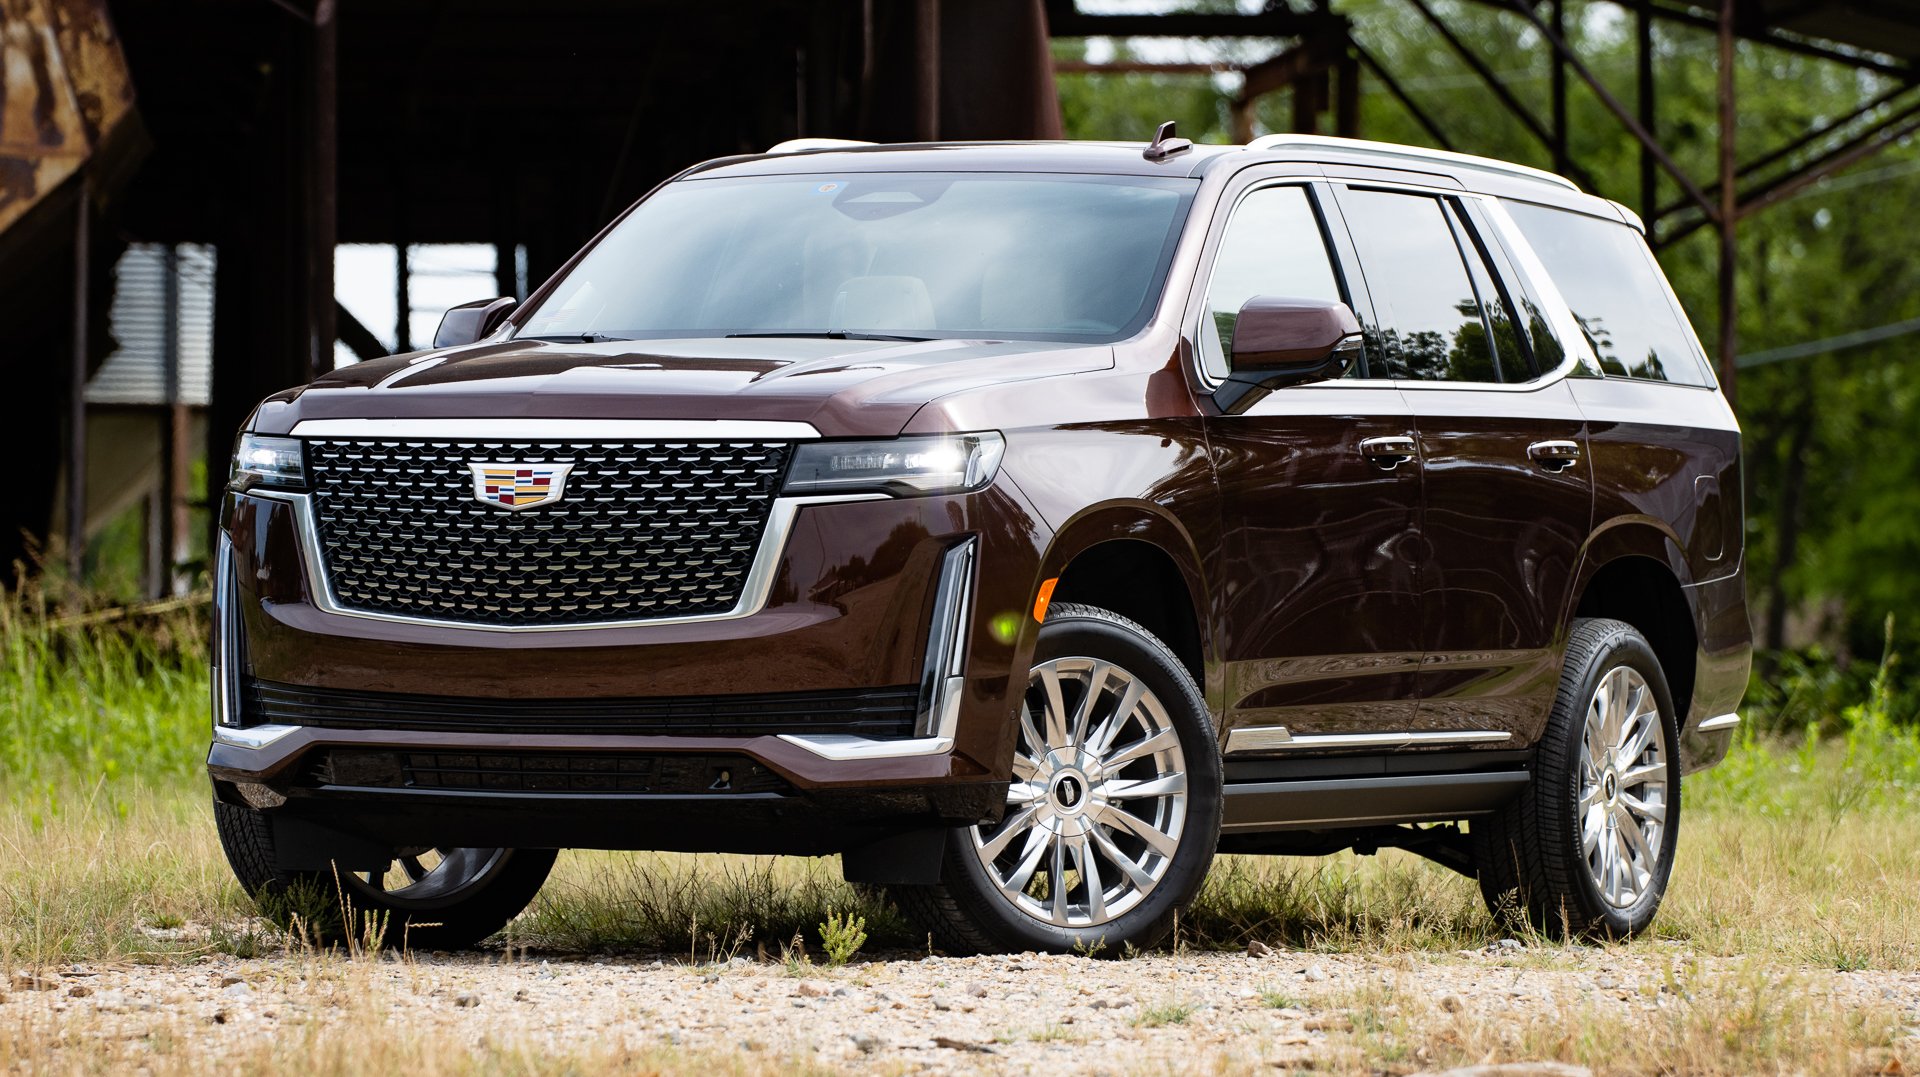 2022 Cadillac Escalade Review: The King of American Luxury — Rev Match Media